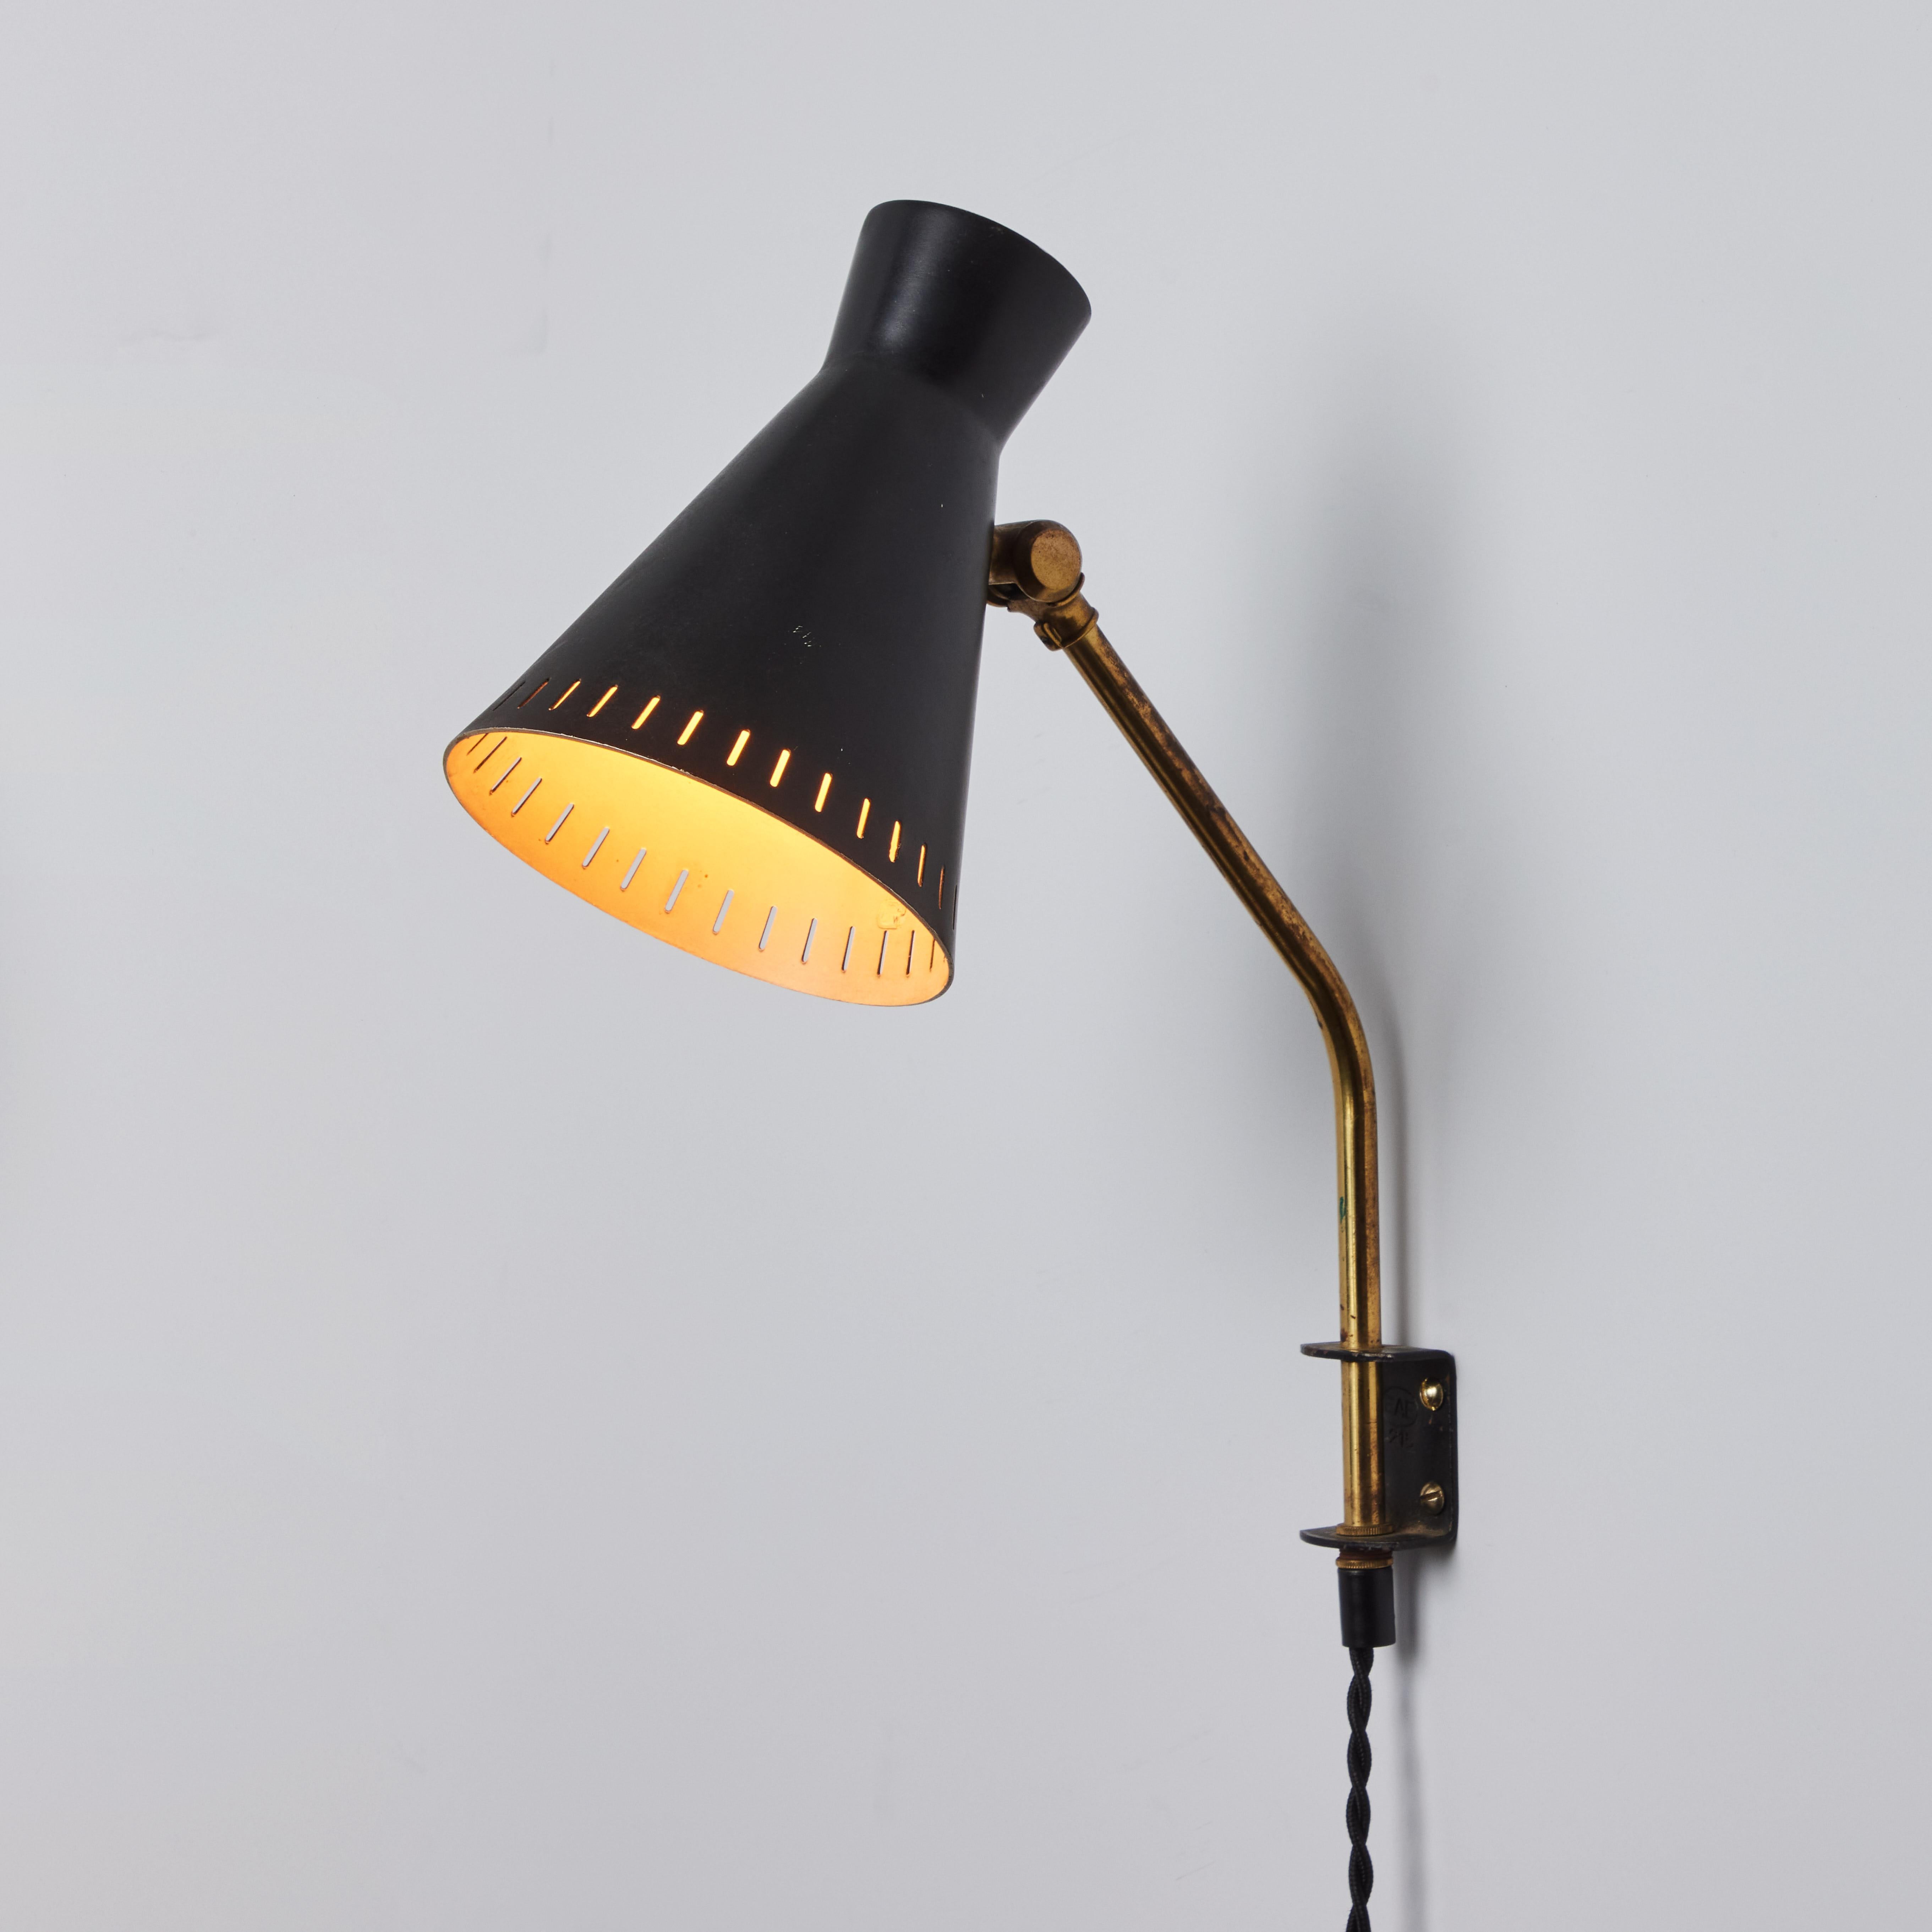 1950s Perforated Metal Diabolo Plug-In Wall Lamp Attributed to Mauri Almari. A rare and elegant design executed in sculptural black painted perforated metal with attractively patinated brass arm. Unmarked.

A contemporary of Paavo Tynell, the